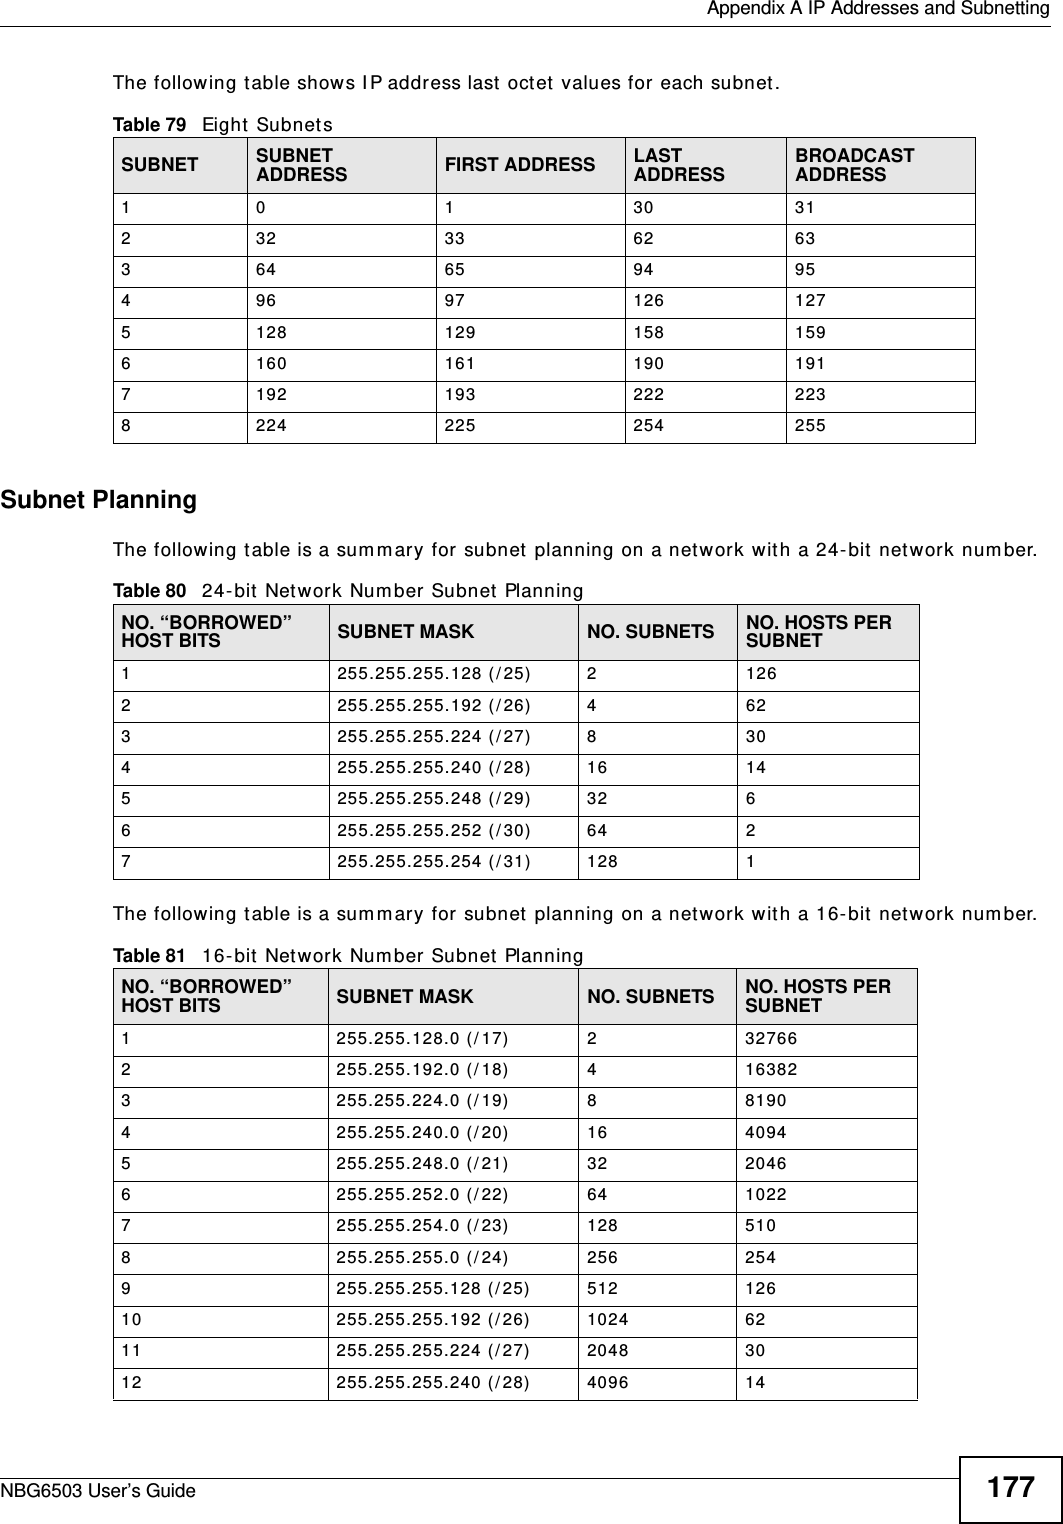  Appendix A IP Addresses and SubnettingNBG6503 User’s Guide 177The following table shows IP address last octet values for each subnet.Subnet PlanningThe following table is a summary for subnet planning on a network with a 24-bit network number.The following table is a summary for subnet planning on a network with a 16-bit network number. Table 79   Eight SubnetsSUBNET SUBNET ADDRESS FIRST ADDRESS LAST ADDRESS BROADCAST ADDRESS1 0 1 30 31232 33 62 63364 65 94 95496 97 126 1275128 129 158 1596160 161 190 1917192 193 222 2238224 225 254 255Table 80   24-bit Network Number Subnet PlanningNO. “BORROWED” HOST BITS SUBNET MASK NO. SUBNETS NO. HOSTS PER SUBNET1255.255.255.128 (/25) 21262255.255.255.192 (/26) 4623255.255.255.224 (/27) 8304255.255.255.240 (/28) 16 145255.255.255.248 (/29) 32 66255.255.255.252 (/30) 64 27255.255.255.254 (/31) 128 1Table 81   16-bit Network Number Subnet PlanningNO. “BORROWED” HOST BITS SUBNET MASK NO. SUBNETS NO. HOSTS PER SUBNET1255.255.128.0 (/17) 2327662255.255.192.0 (/18) 4163823255.255.224.0 (/19) 881904255.255.240.0 (/20) 16 40945255.255.248.0 (/21) 32 20466255.255.252.0 (/22) 64 10227255.255.254.0 (/23) 128 5108255.255.255.0 (/24) 256 2549255.255.255.128 (/25) 512 12610 255.255.255.192 (/26) 1024 6211 255.255.255.224 (/27) 2048 3012 255.255.255.240 (/28) 4096 14